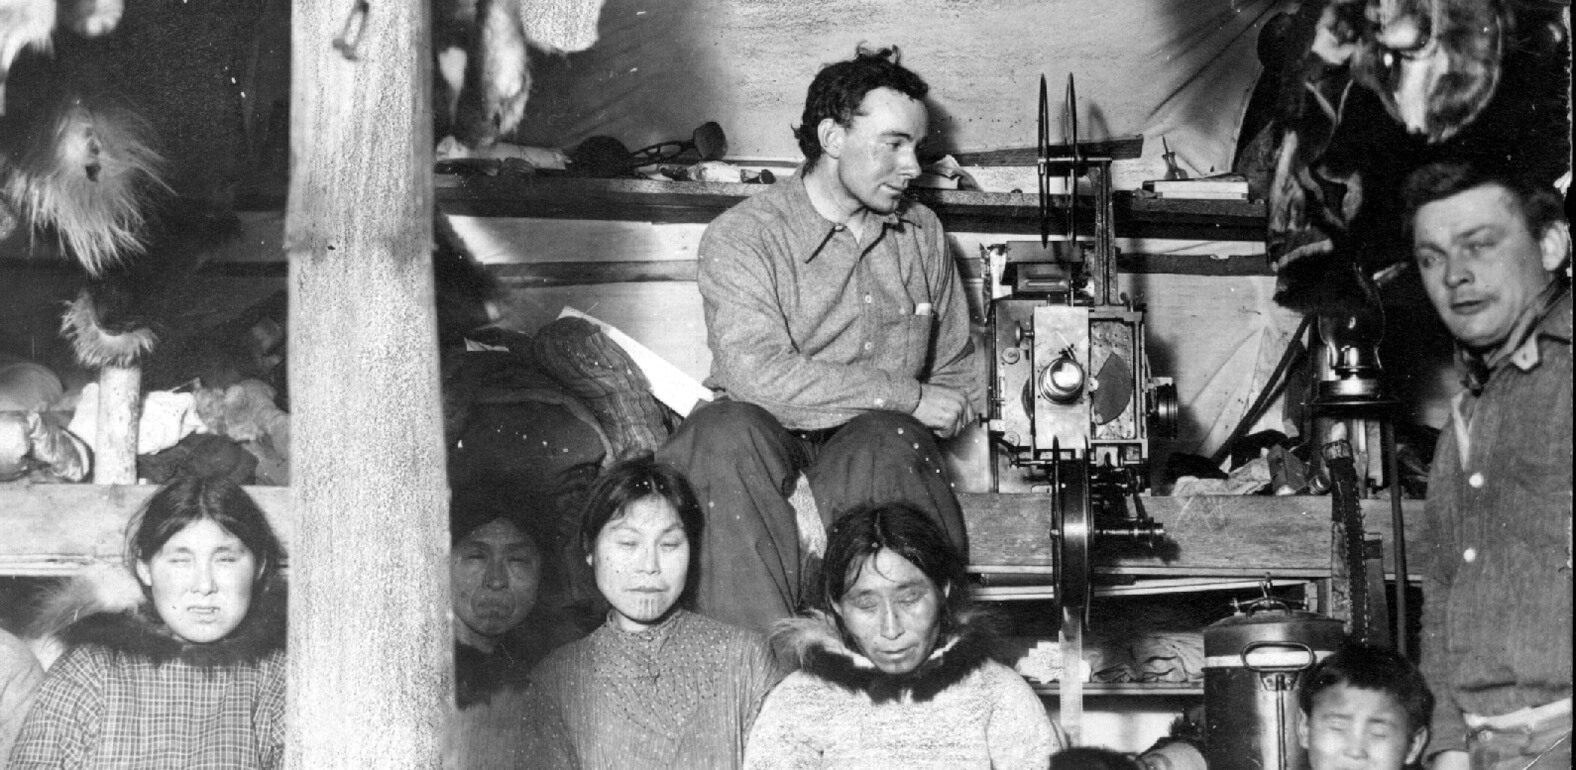 1913: Wilkins showing films to Eskimos during the Canadian Arctic Mission